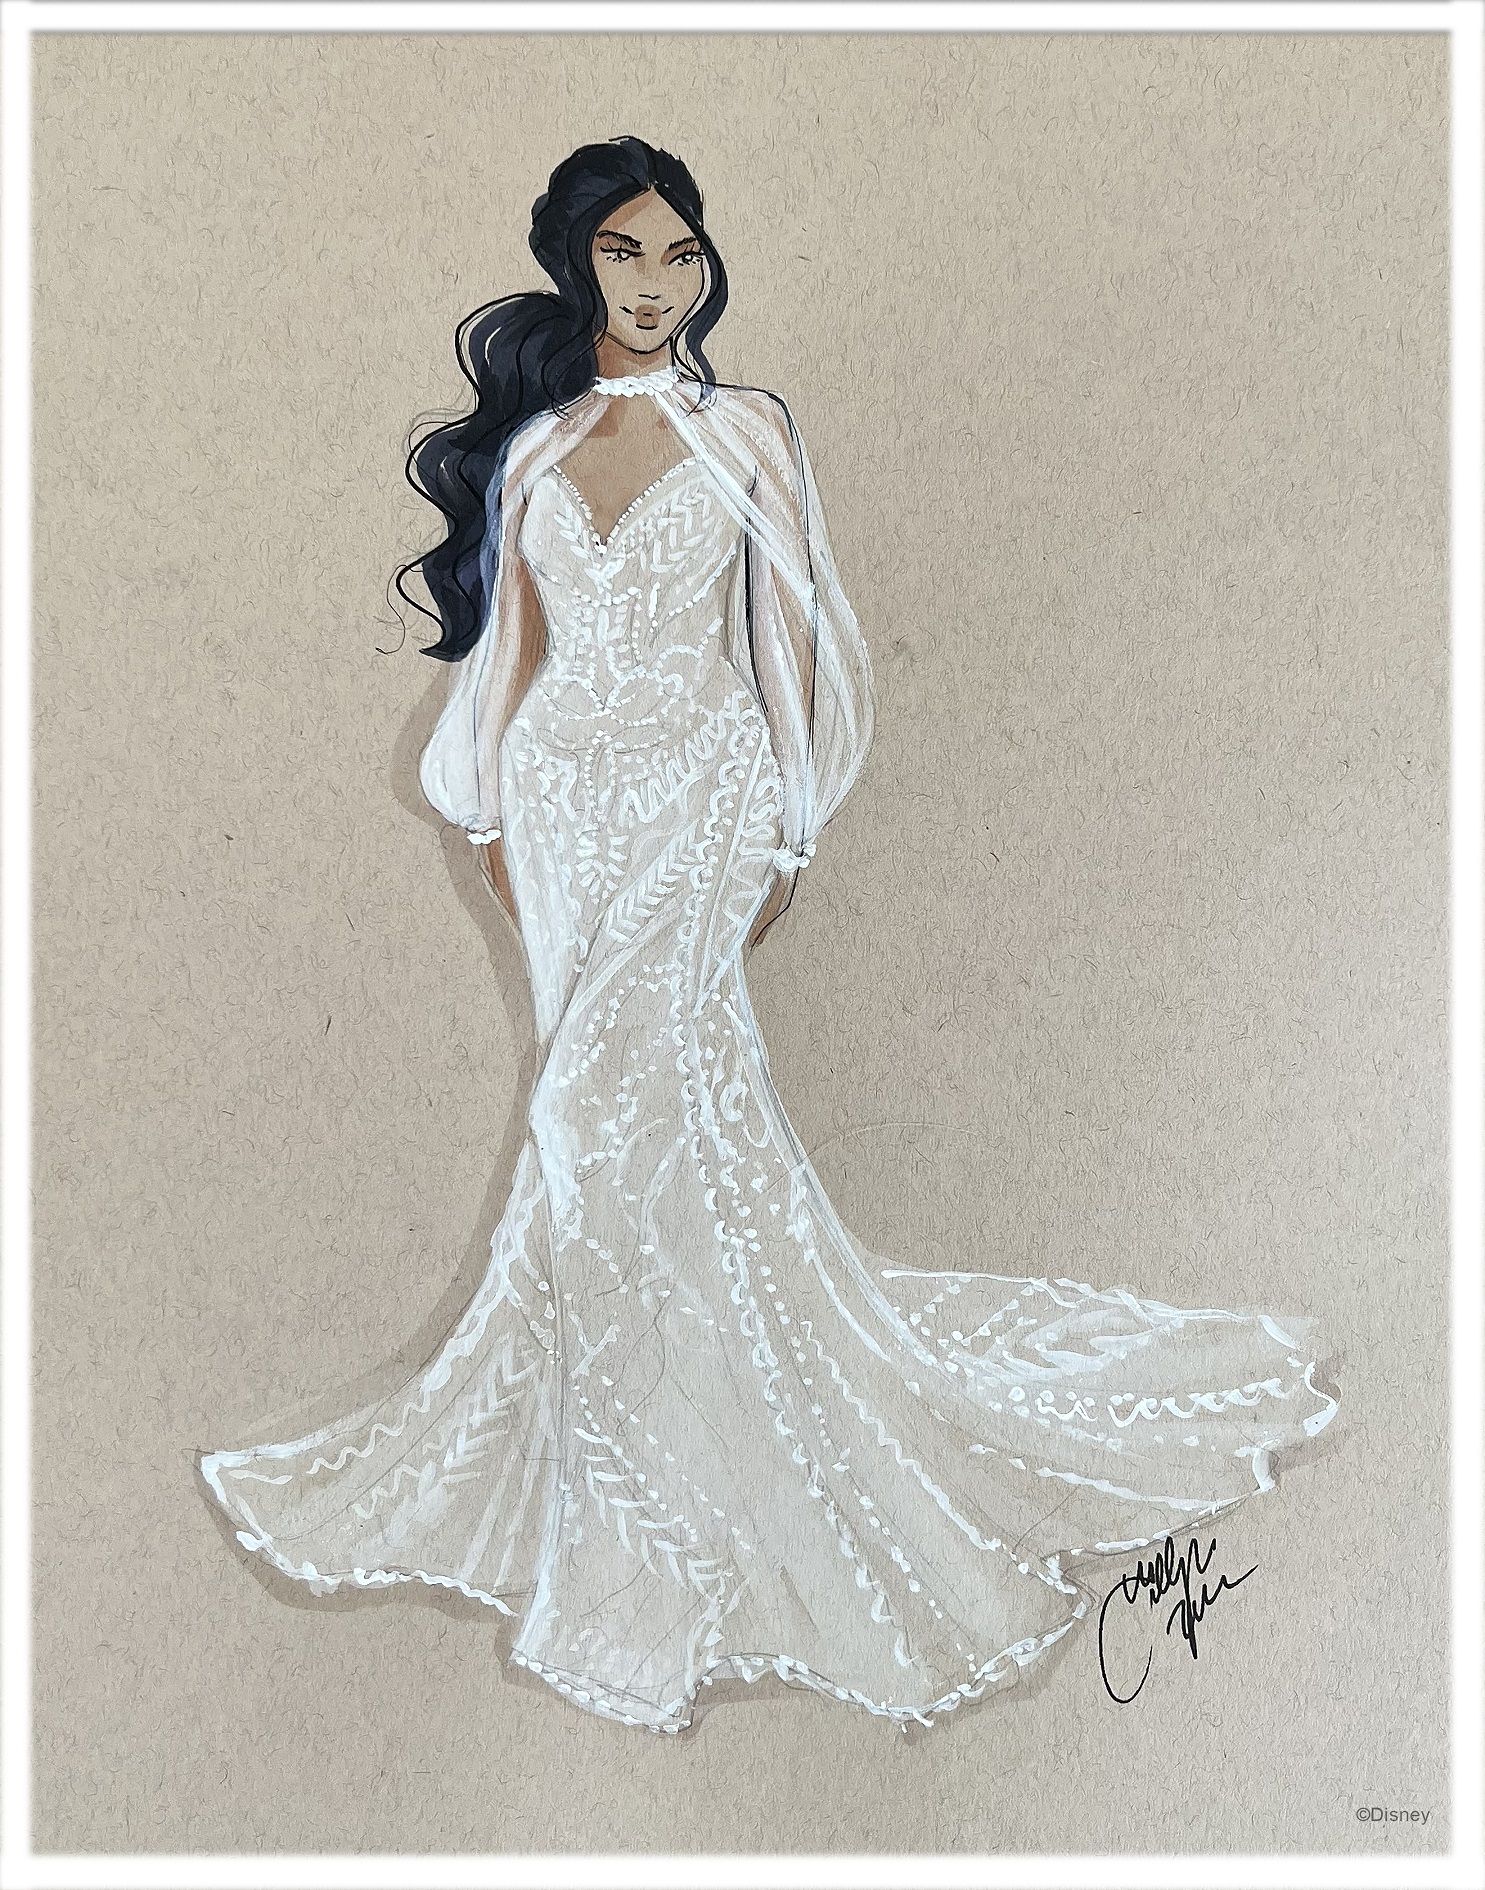 Illustrated by Holly Nichols, this gown inspired by Disney's Princess Jasmine, features elegant sheer tulle sleeves and beaded detailing along both the cuff and collar.